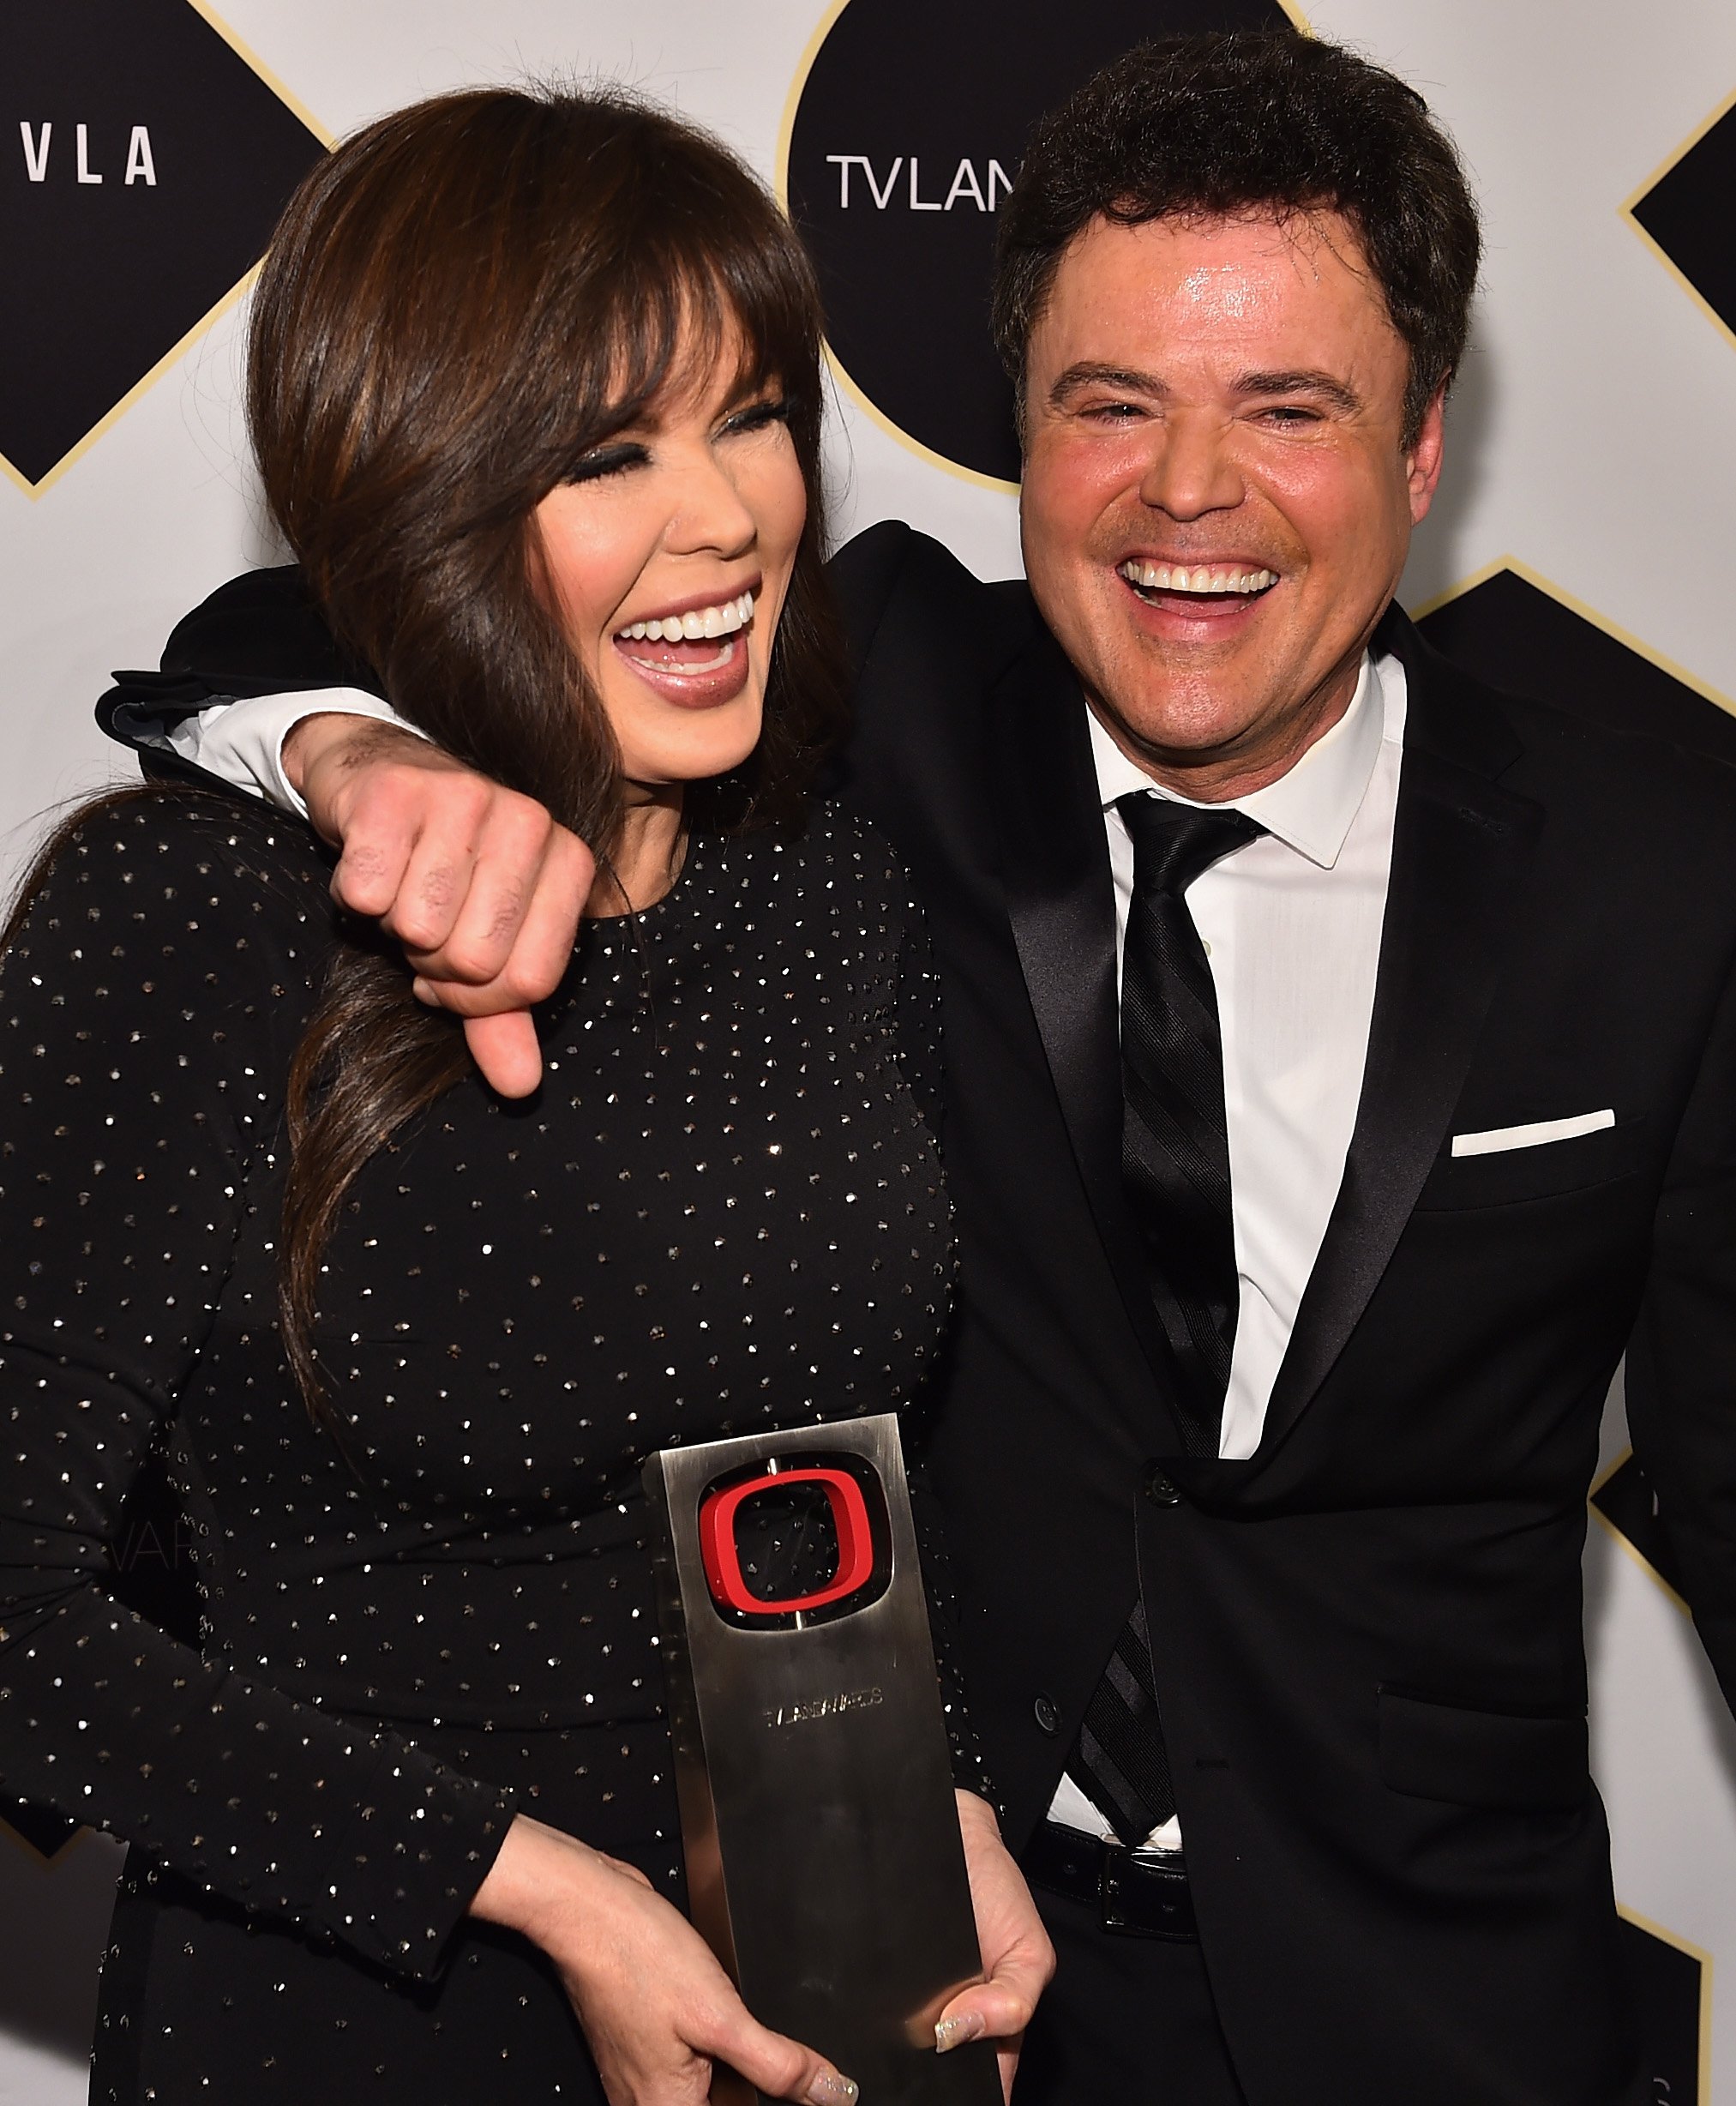 Marie and Donny Osmond attend the 2015 TV Land Awards in Beverly Hills, California on April 11, 2015 | Photo: Getty Images